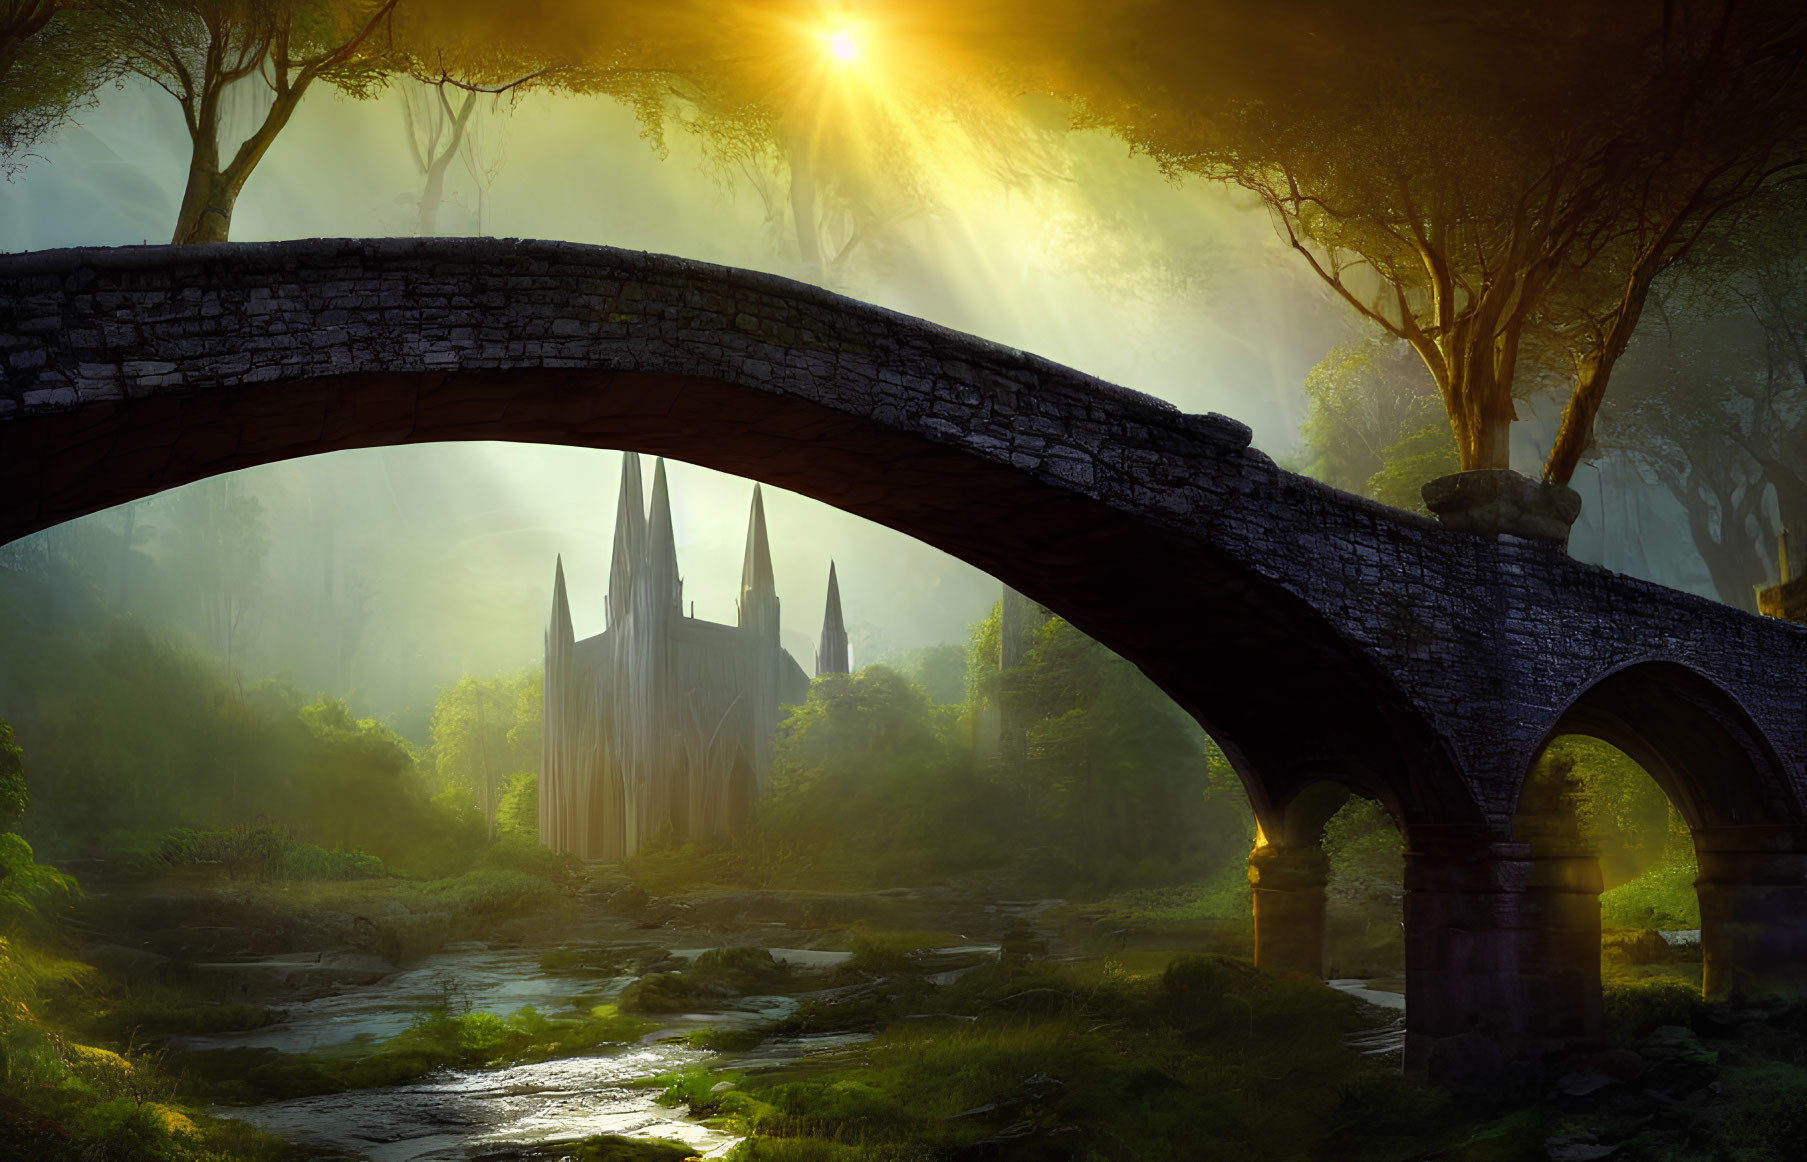 Stone bridge over tranquil stream in misty landscape with distant cathedral